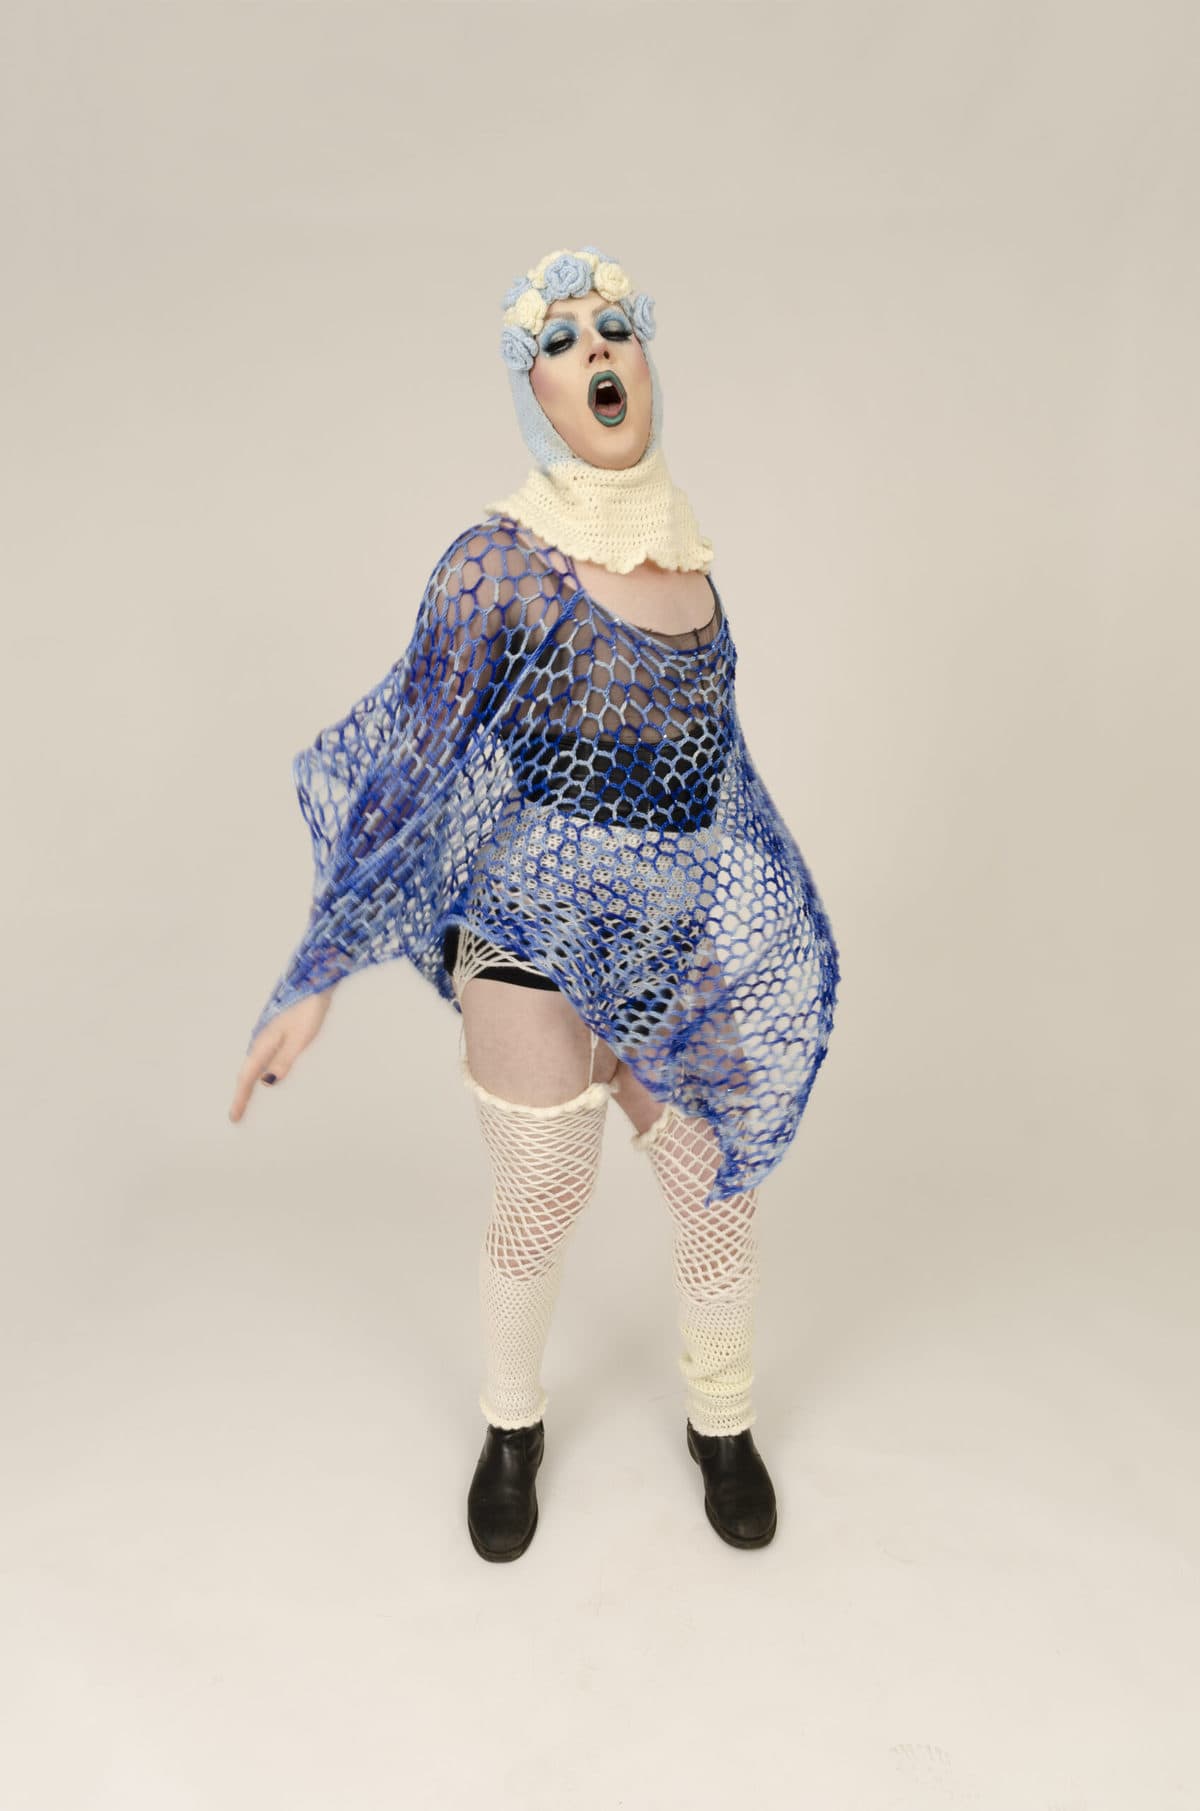 image description: a drag performer in a hand-made costume